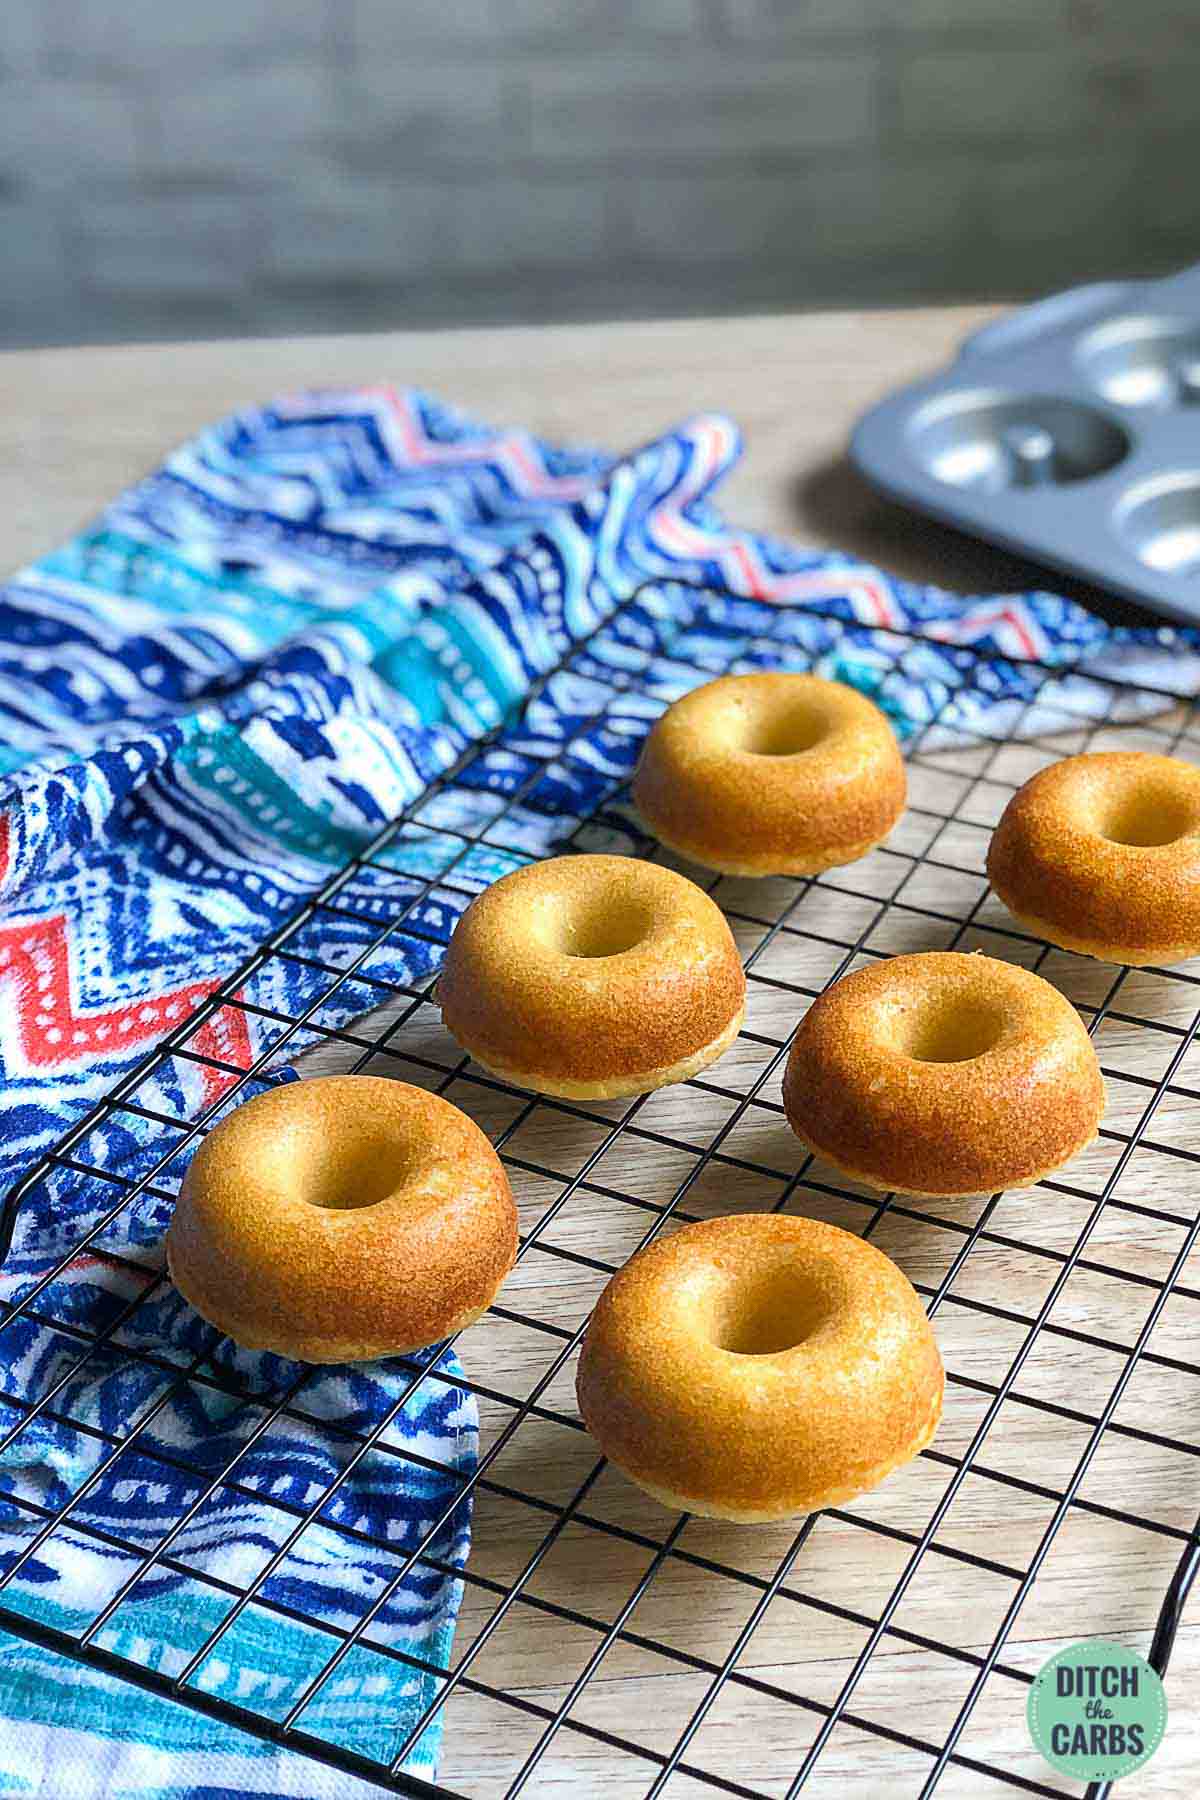 Cooling low carb donuts on a rack